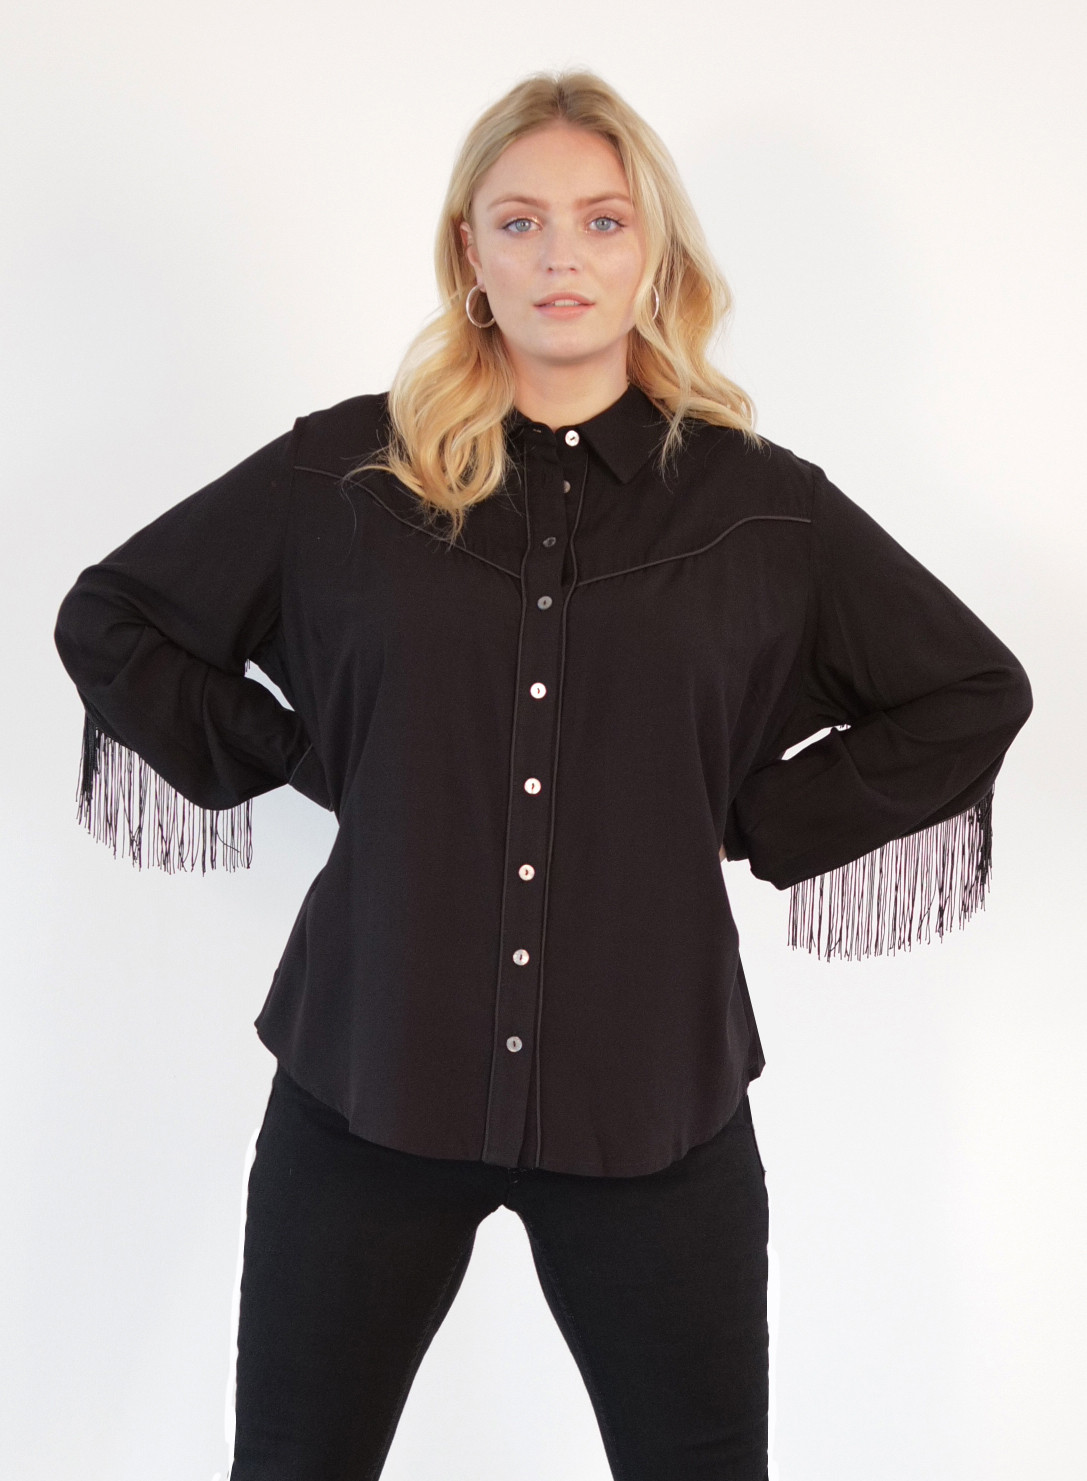 Buy > cowgirl shirts with fringe > in stock